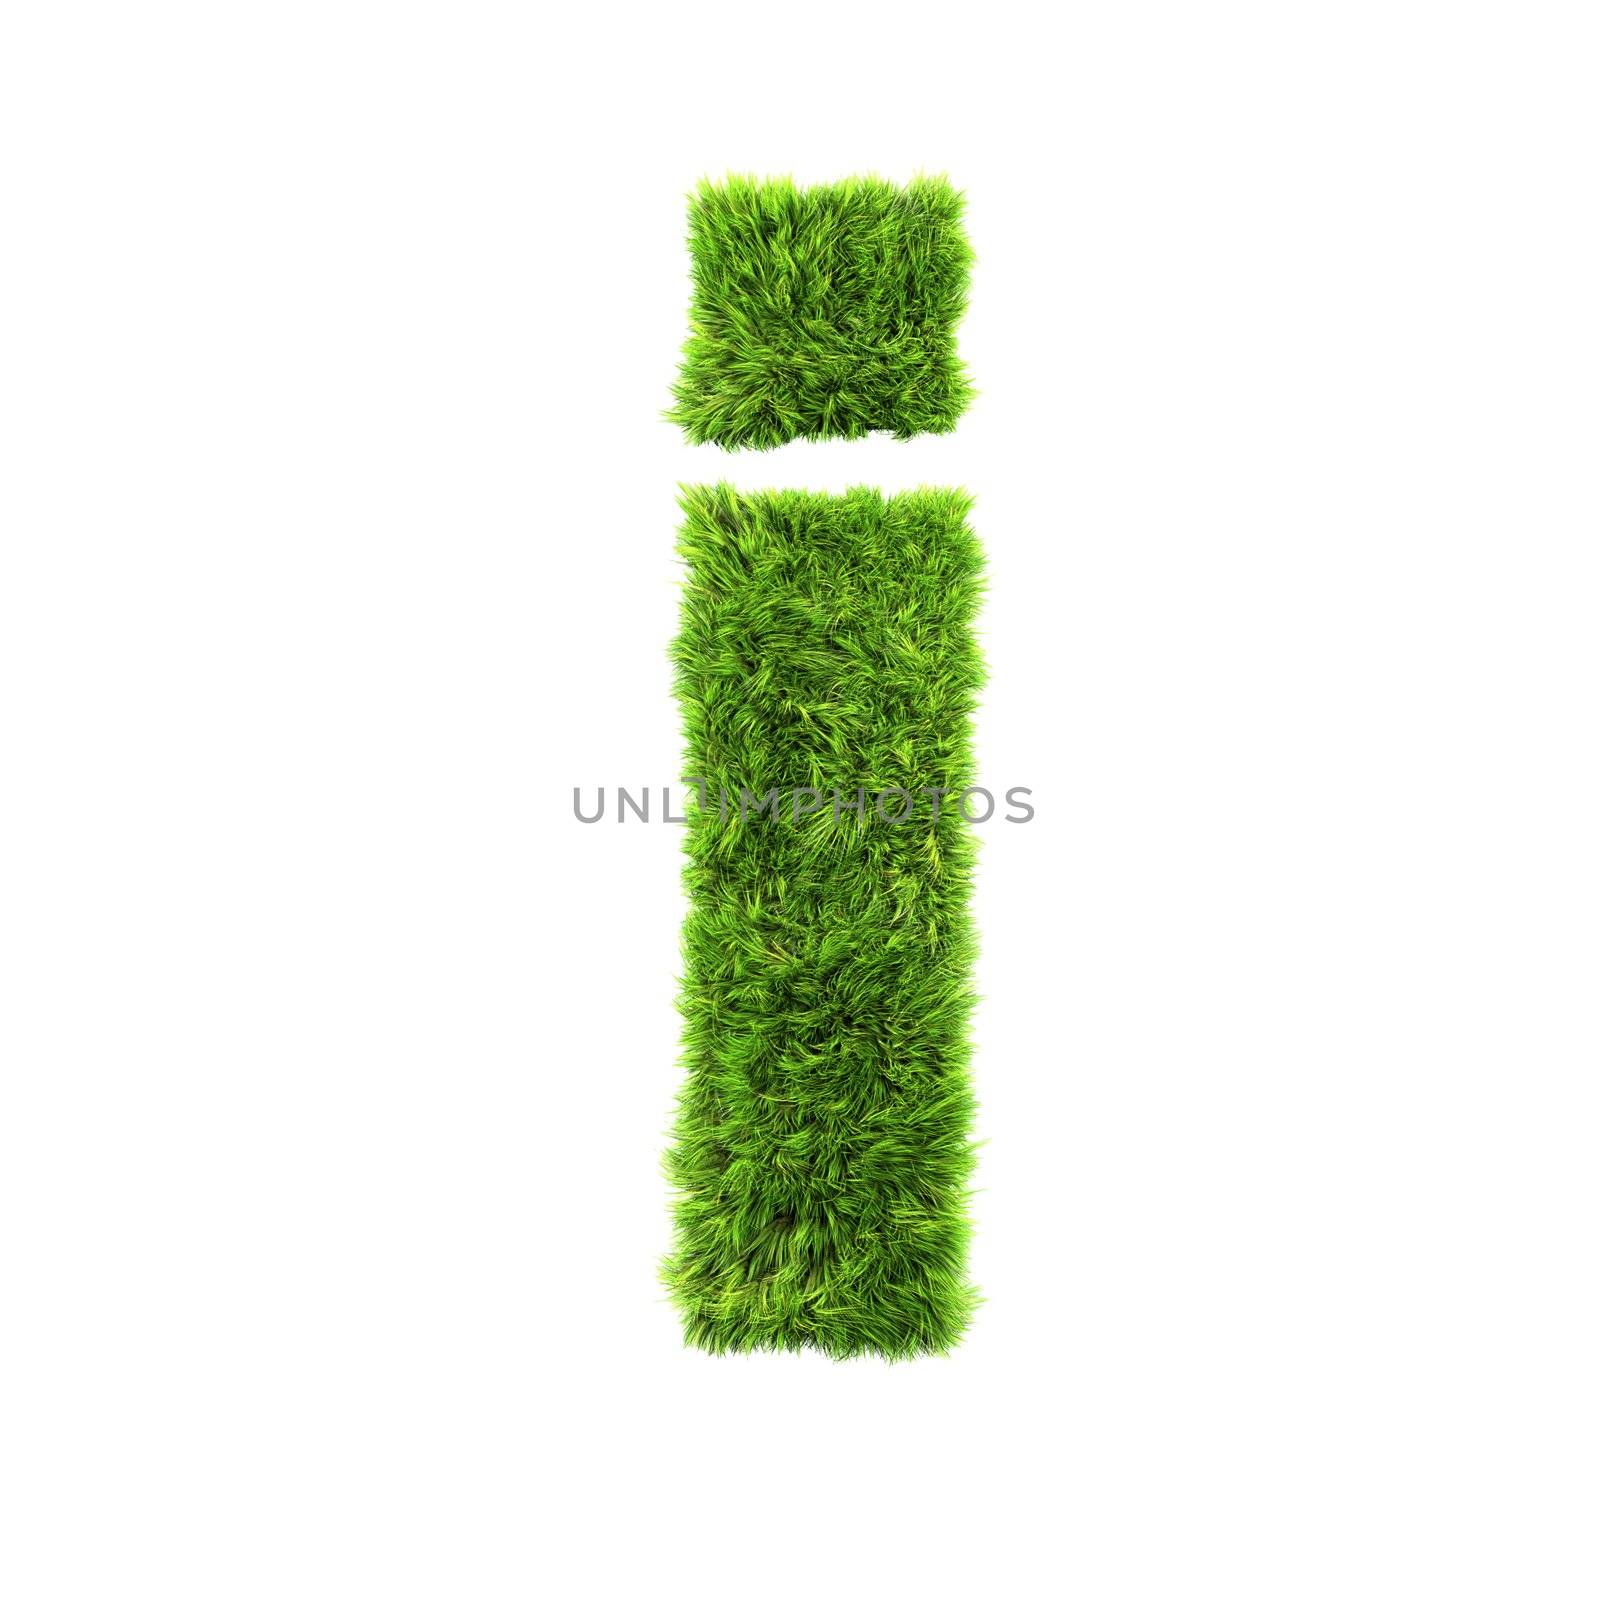 3d grass letter isolated on white background - i